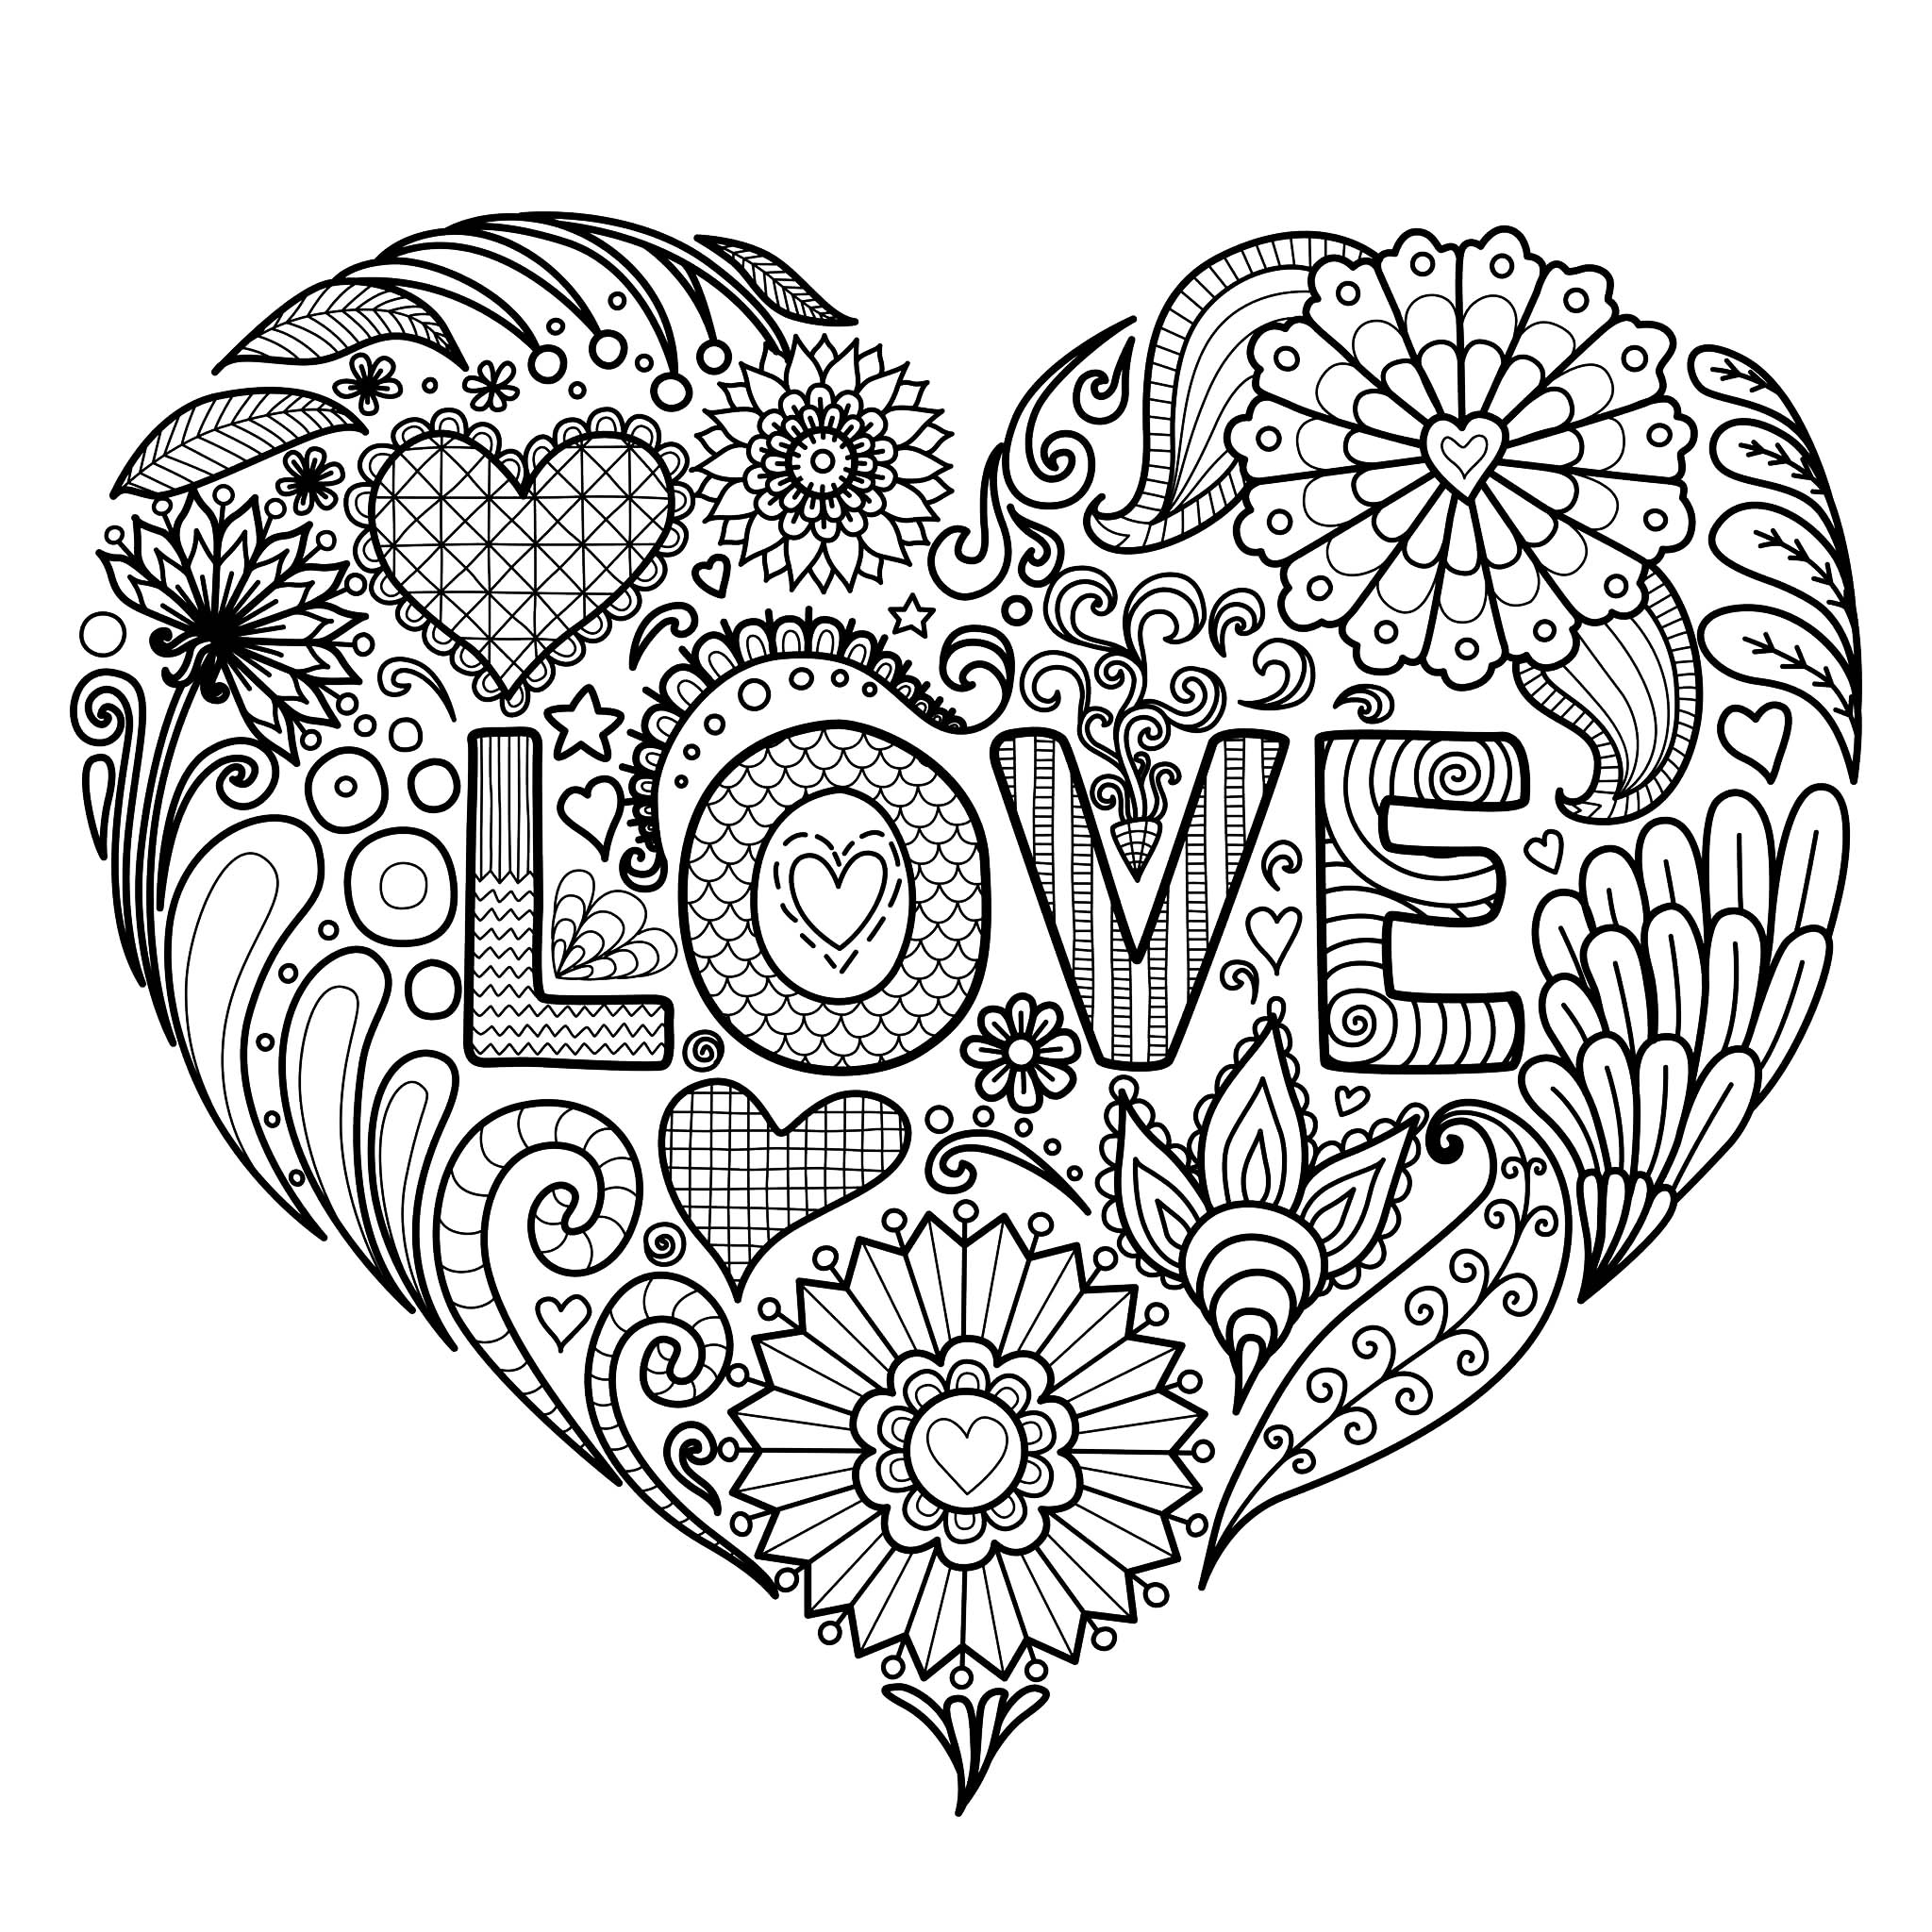 A beautiful Heart with flowers and the text 'LOVE' to color, Artist : Bimdeedee   Source : 123rf